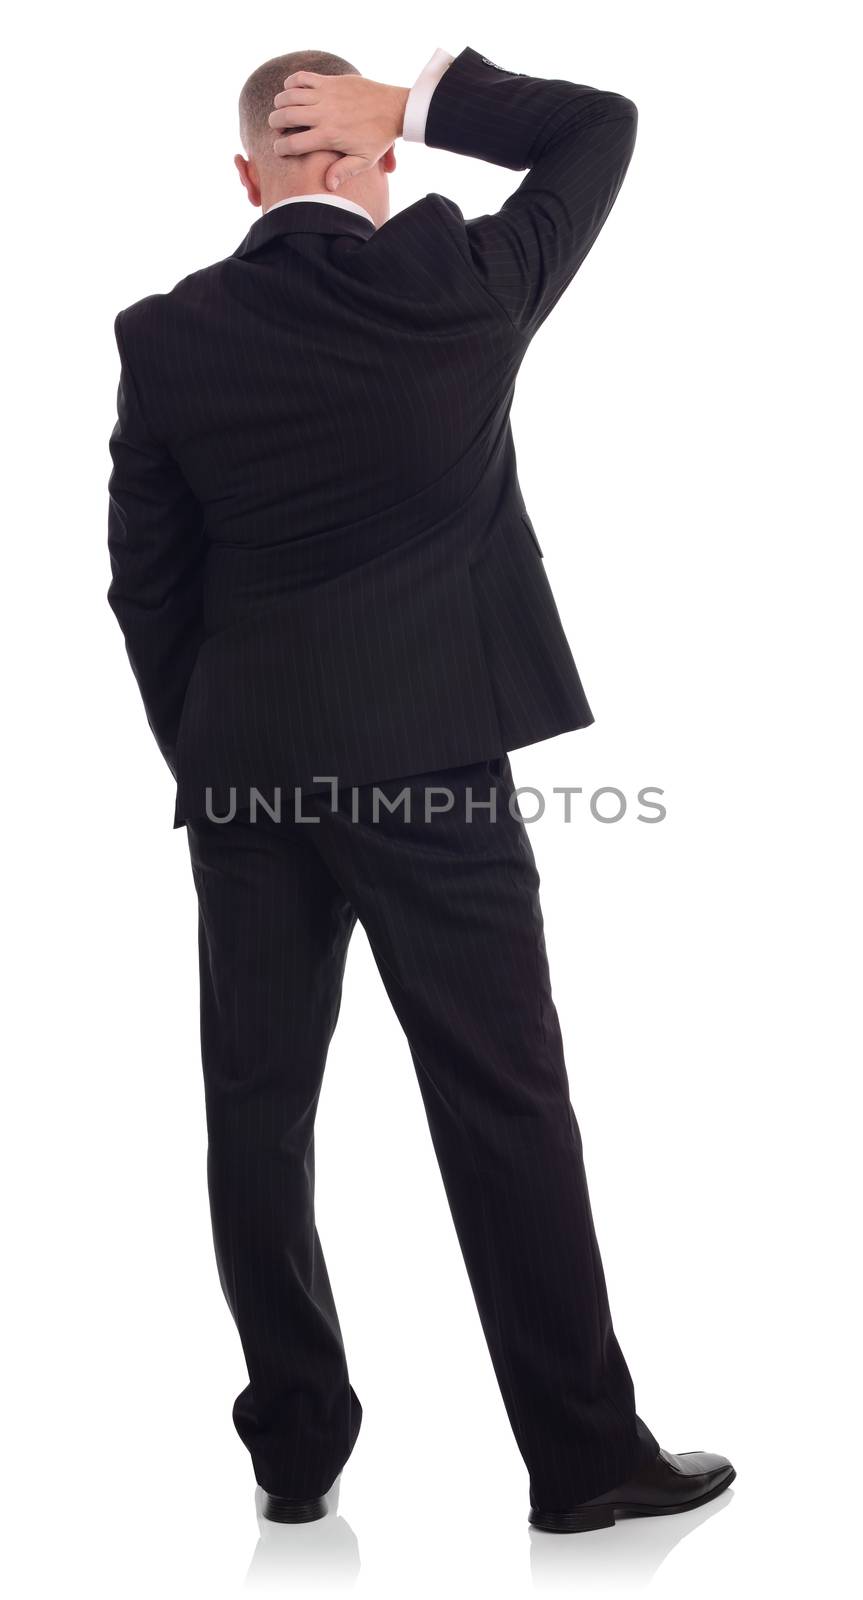 businessman viwed from behind scratching head thinking about something, isolated on a white background